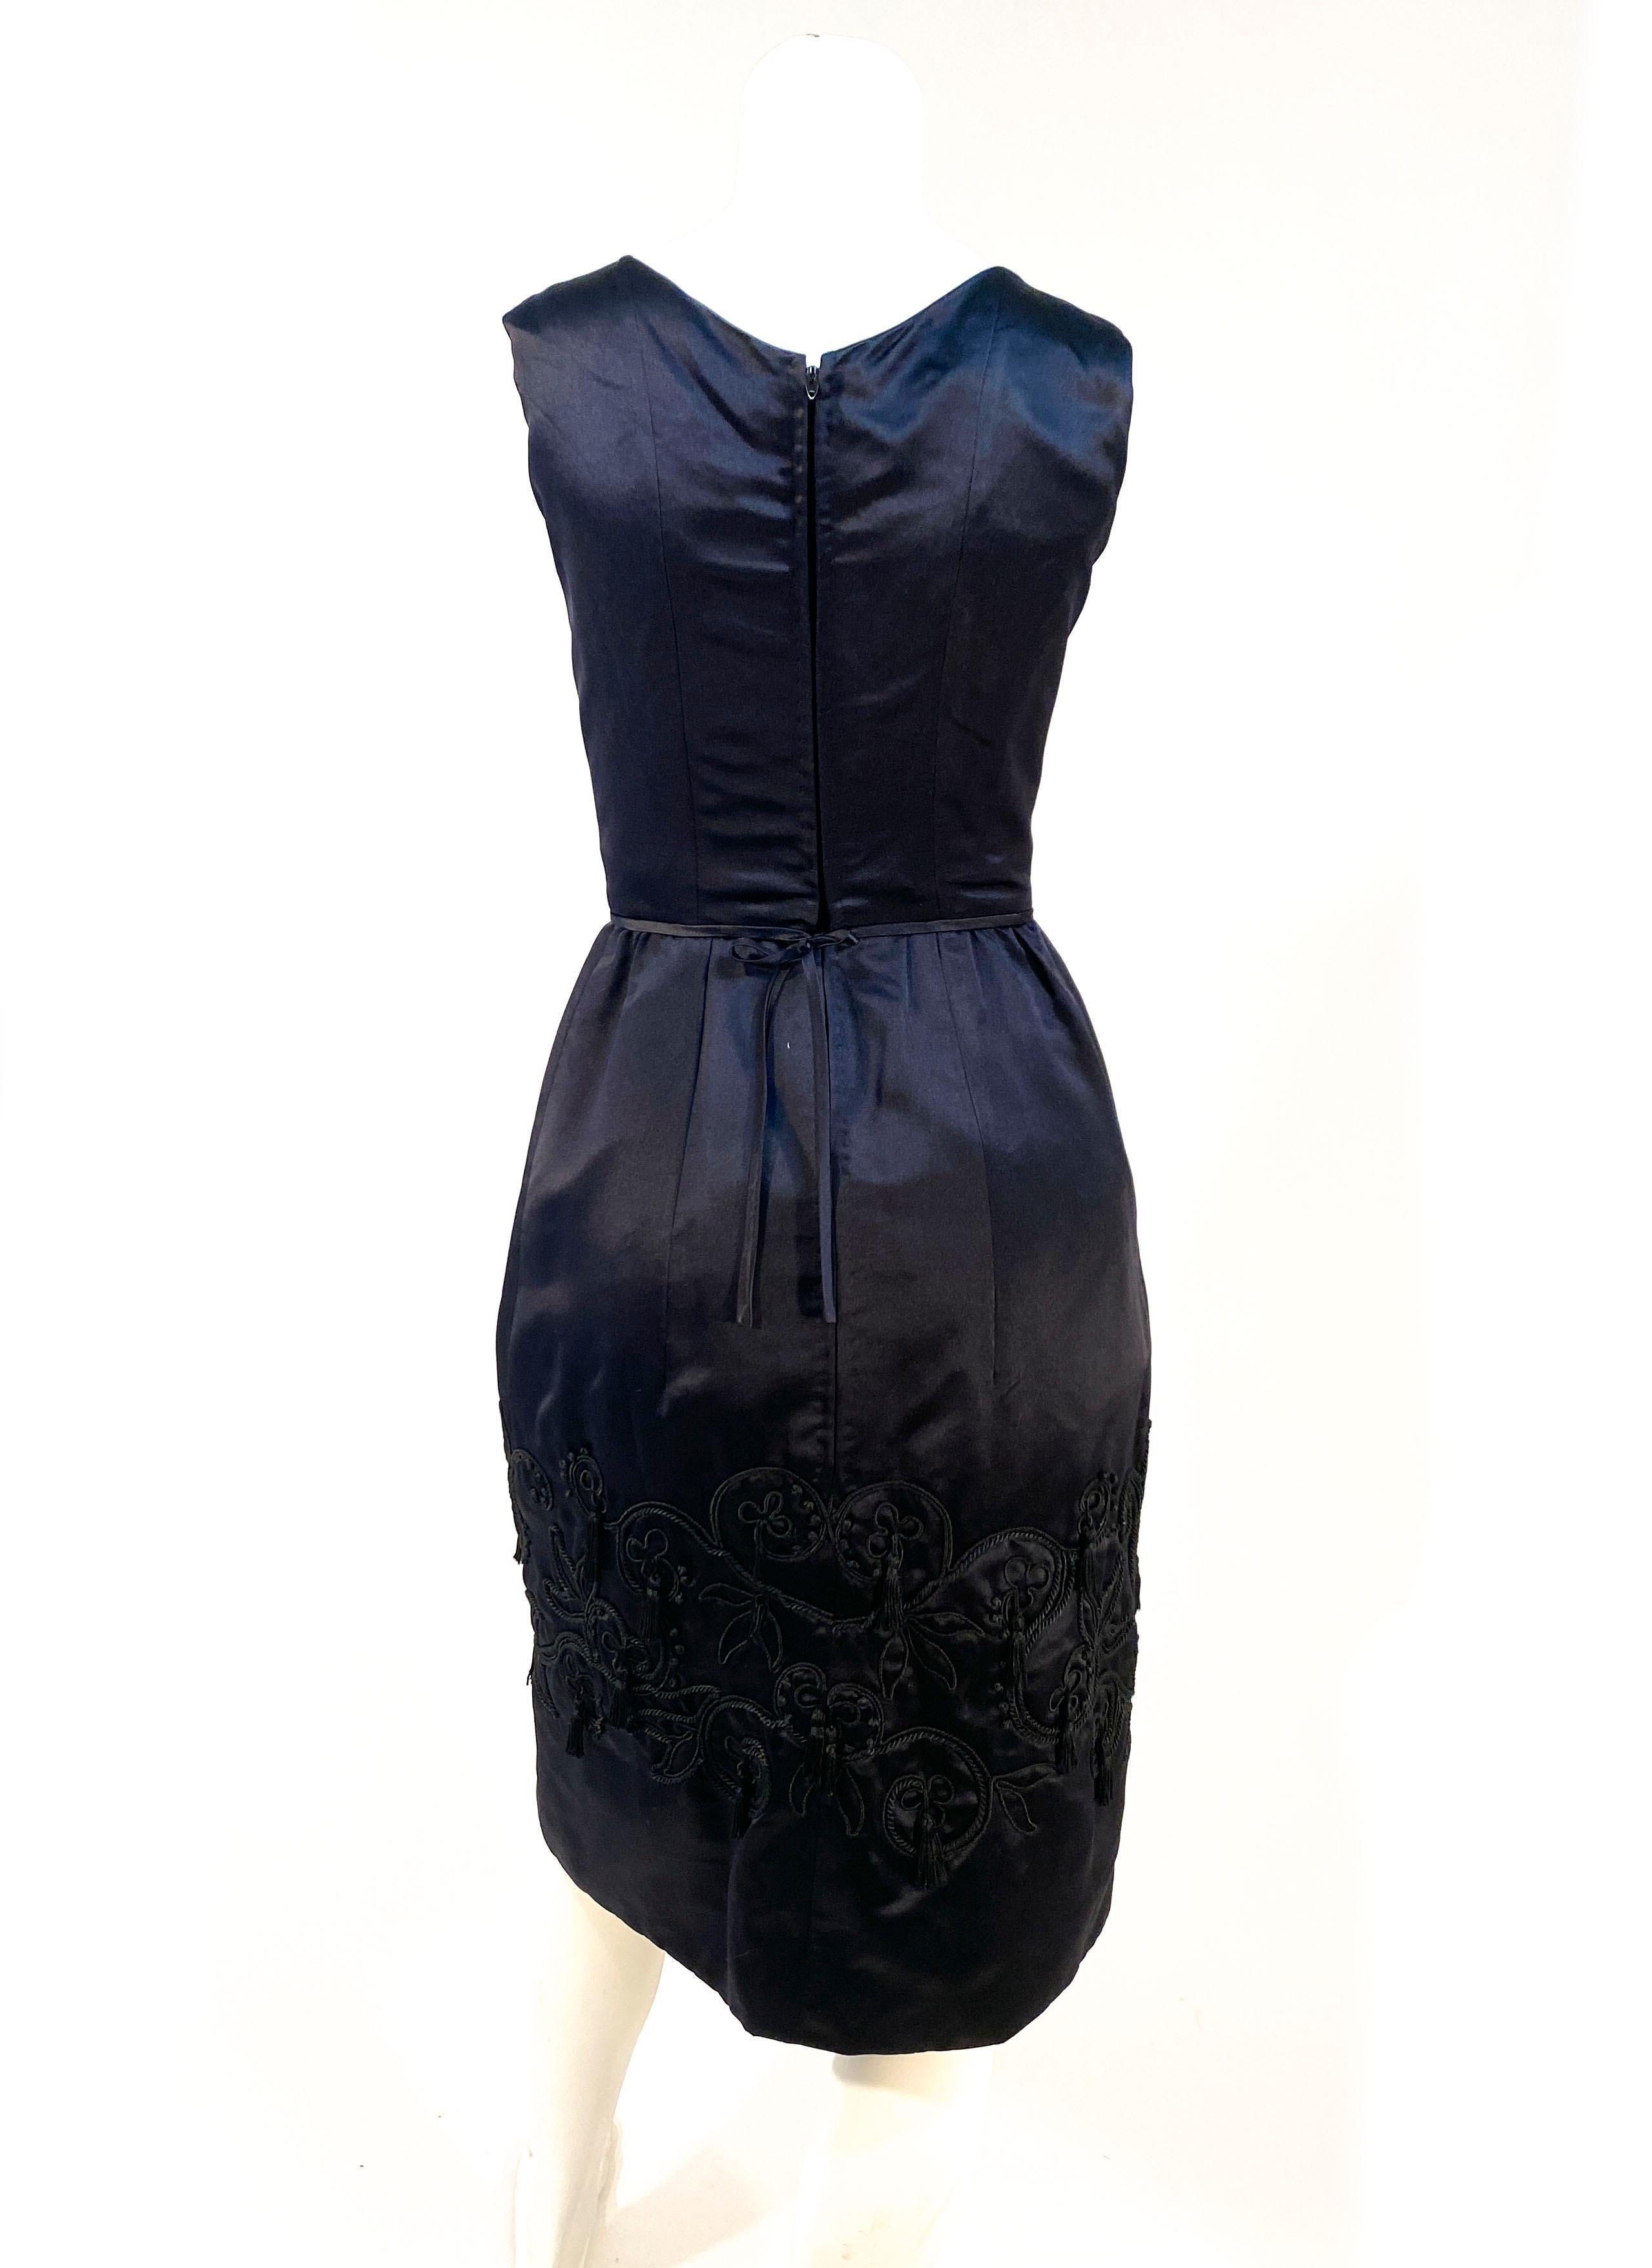 Women's 1960s Black Silk Satin Cocktail Dress with Embroidered Skirt For Sale